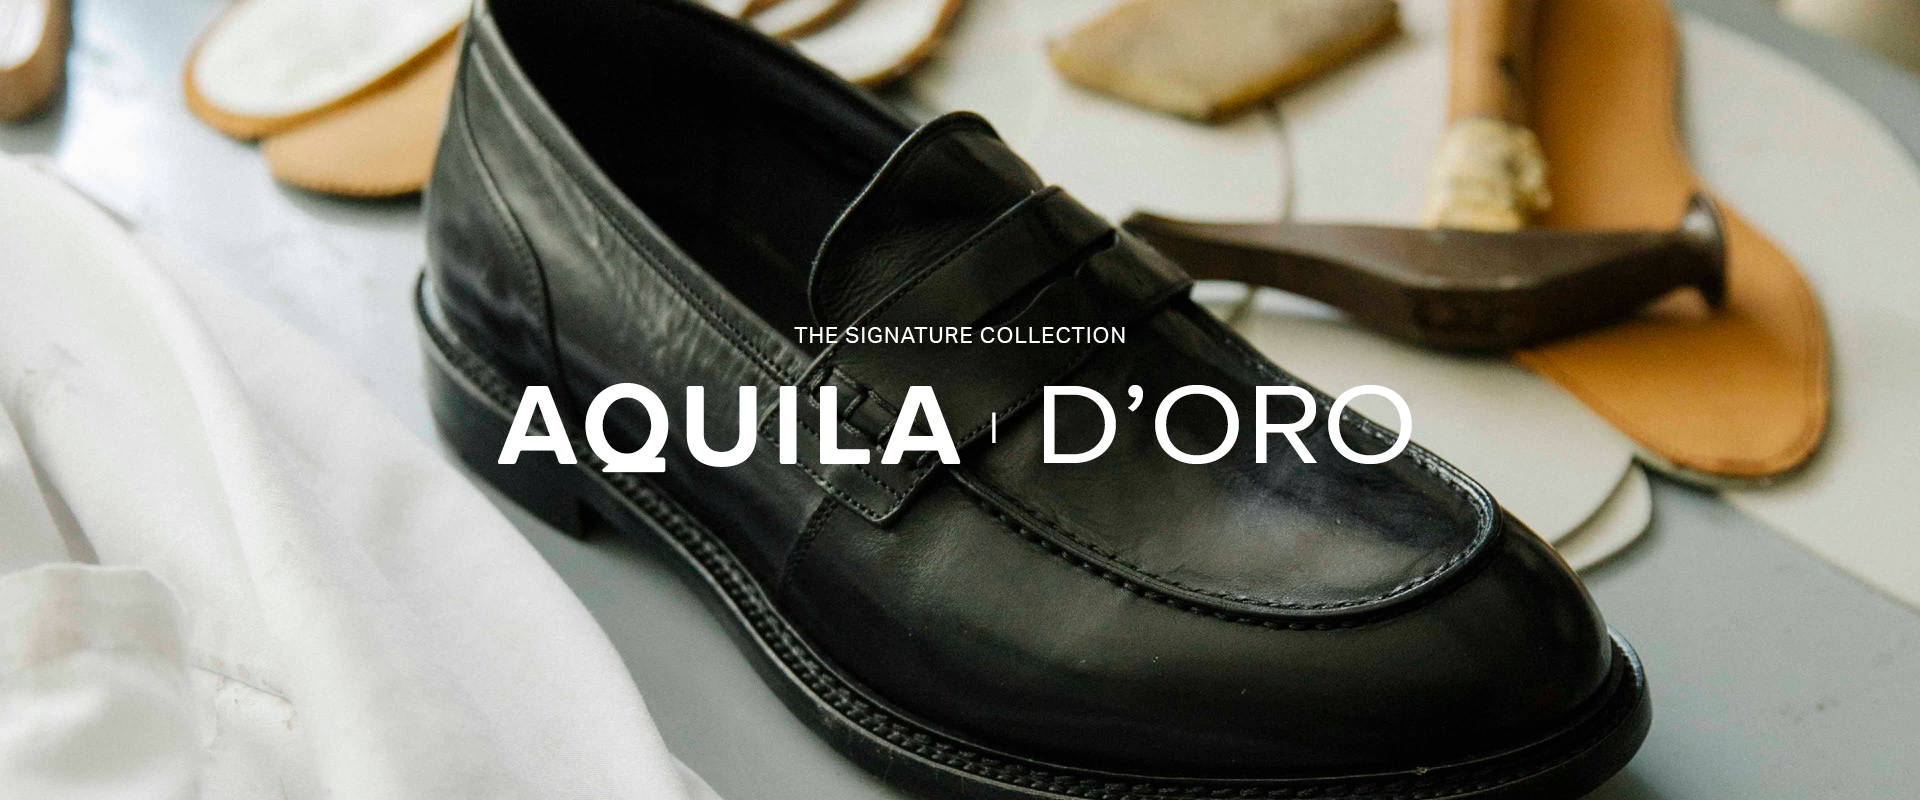 The D'ORO Collection